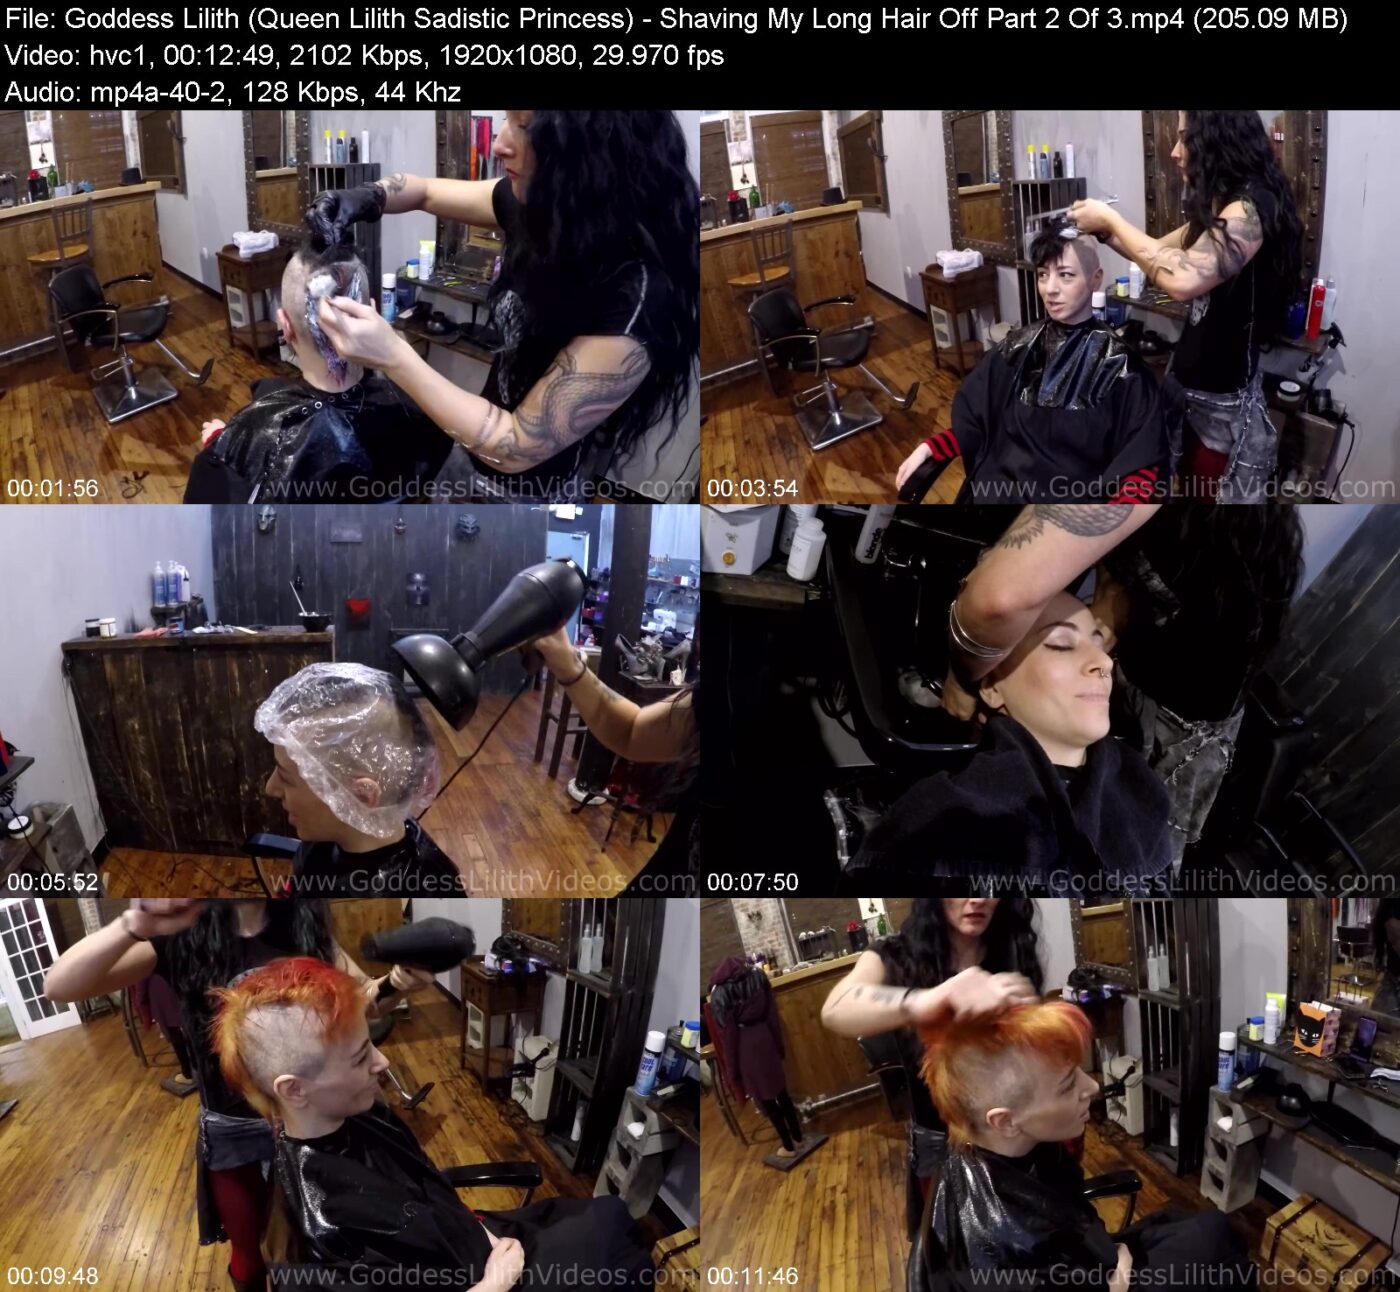 Goddess Lilith (Queen Lilith Sadistic Princess) in Shaving My Long Hair Off Part 2 Of 3